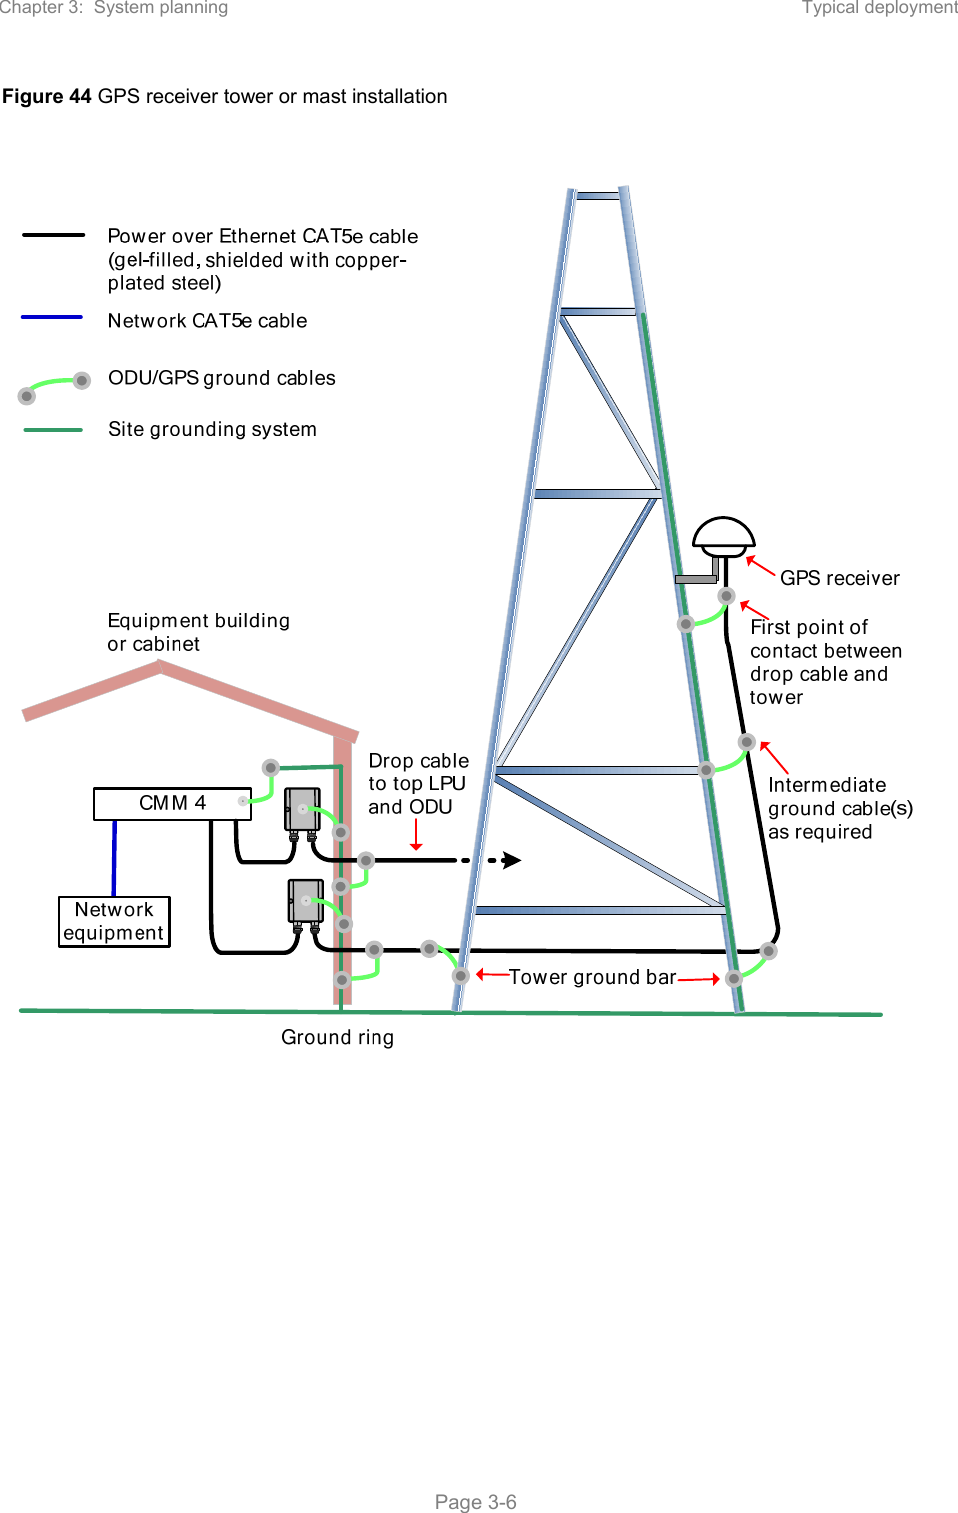 Chapter 3:  System planning  Typical deployment   Page 3-6 Figure 44 GPS receiver tower or mast installation      